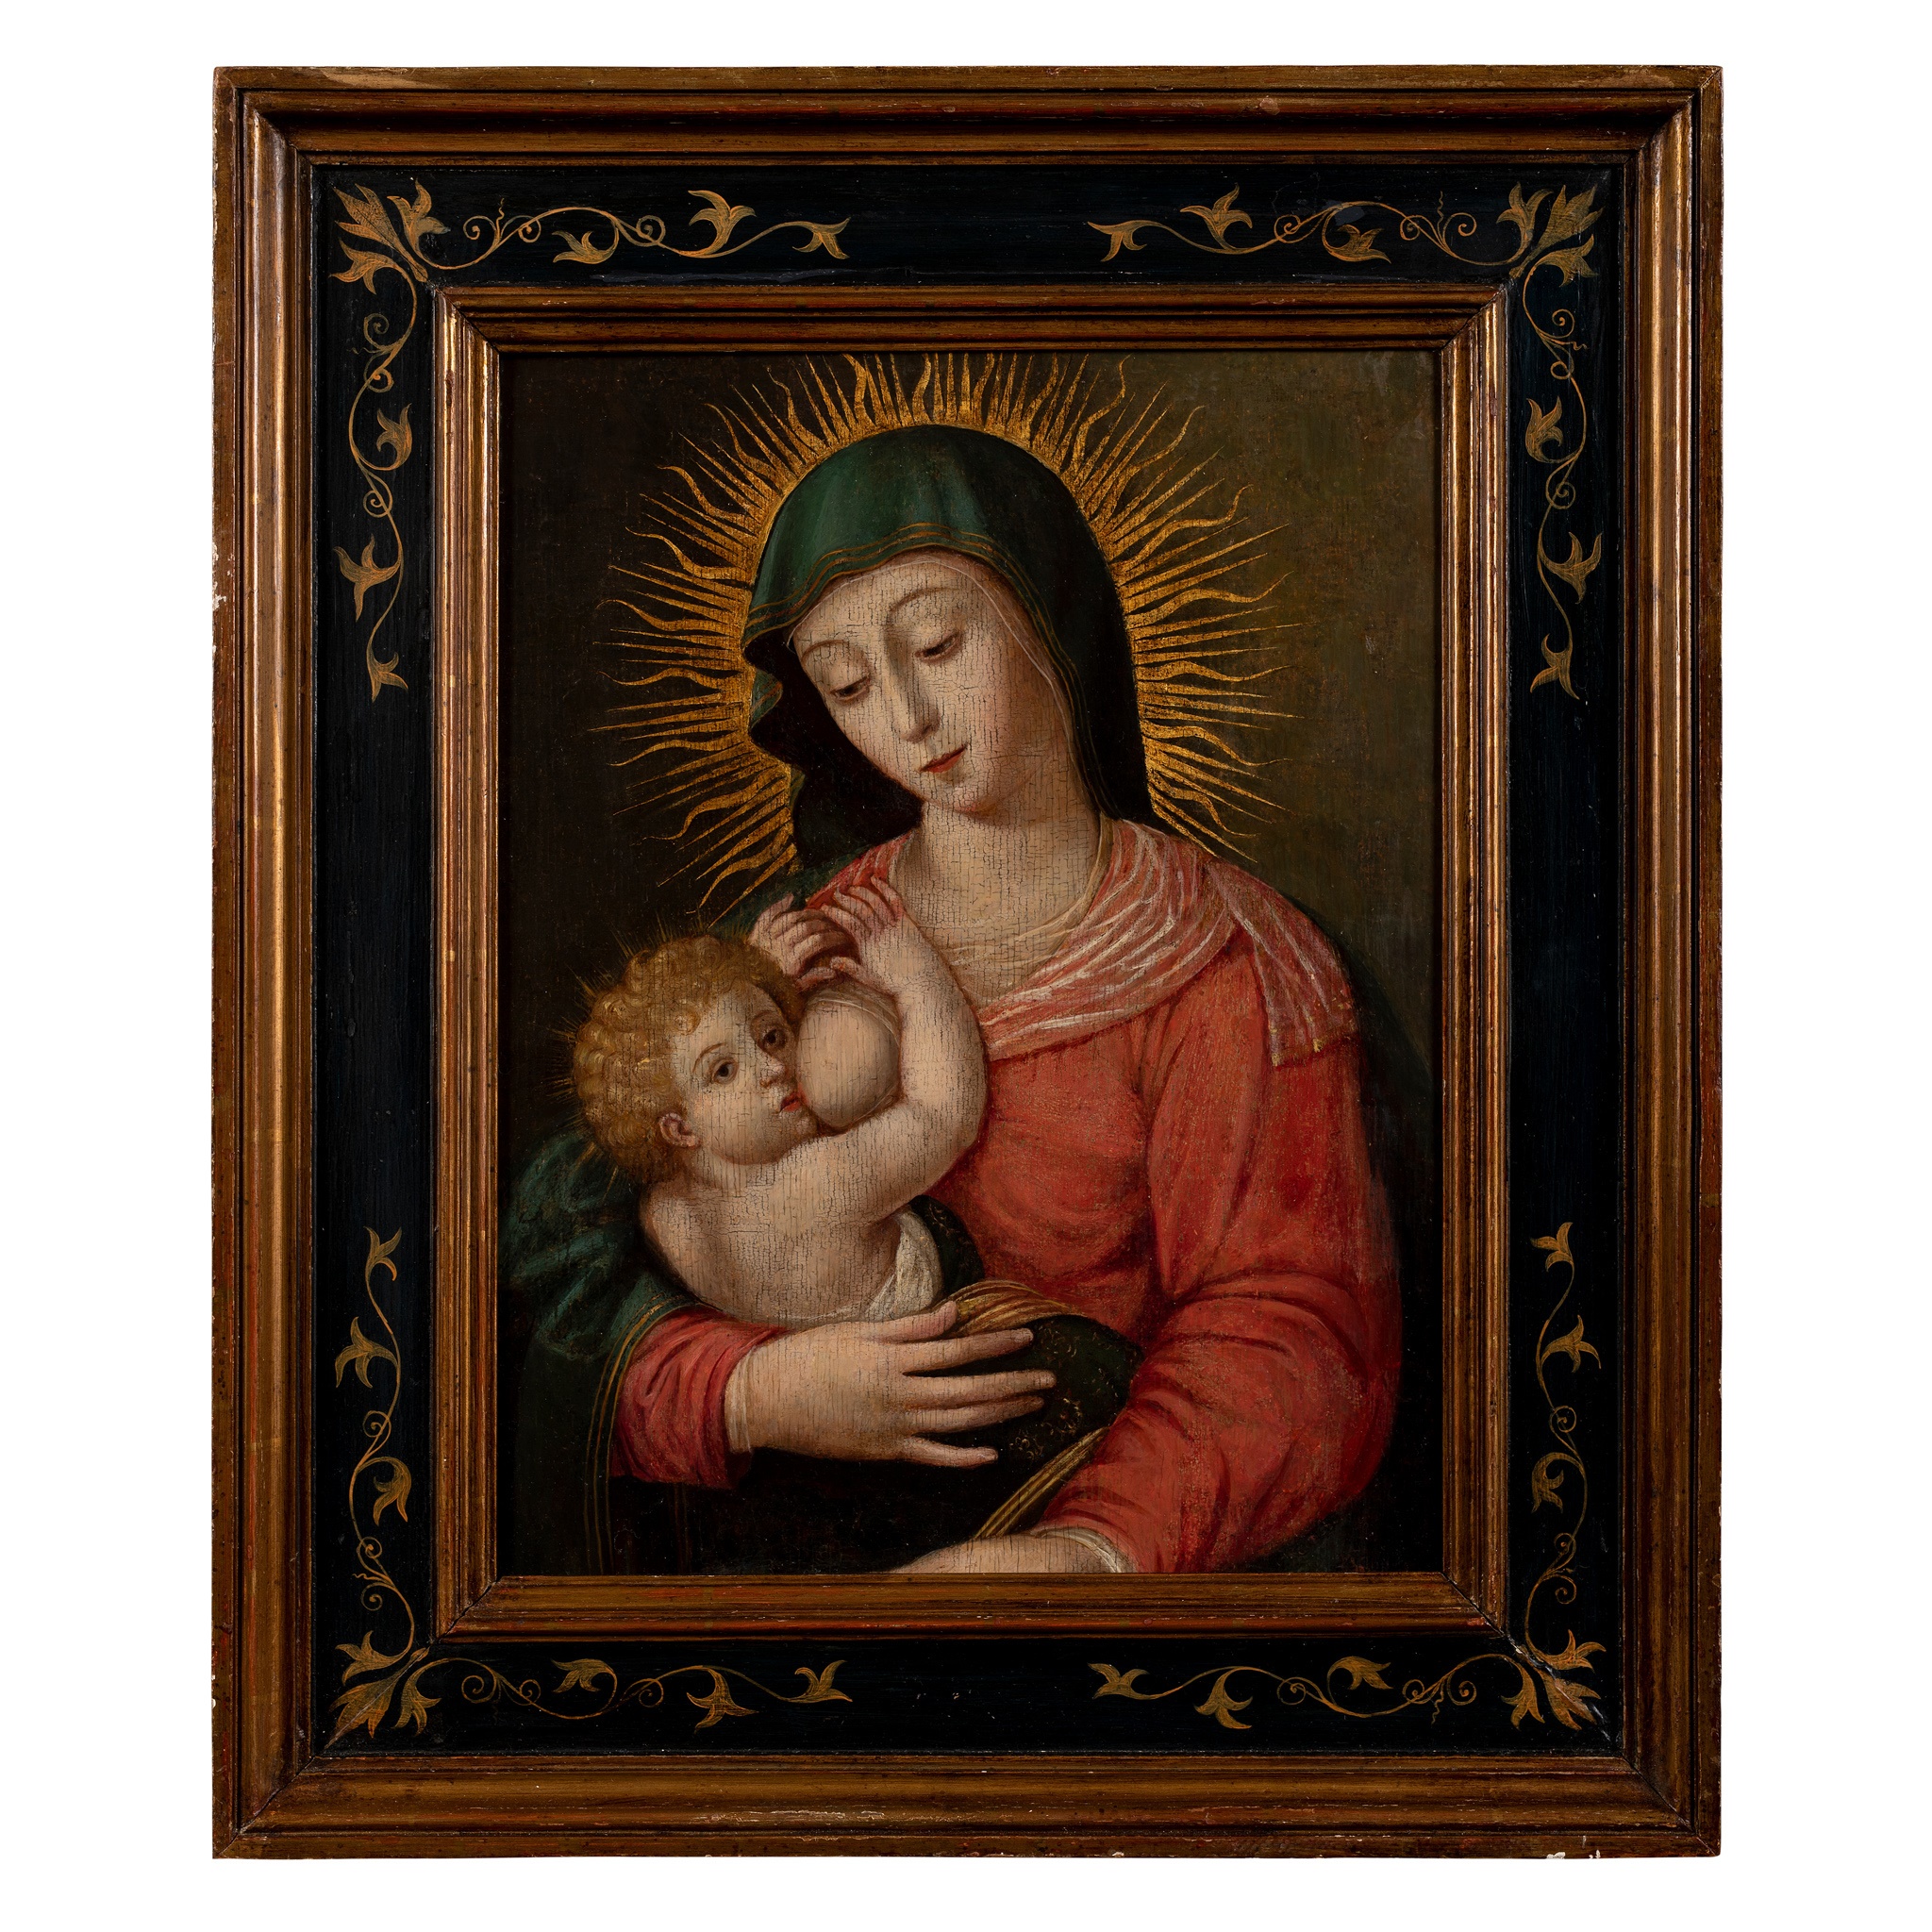 EUROPEAN SCHOOL (17TH/18TH CENTURY) MADONNA AND CHILD - Image 2 of 2